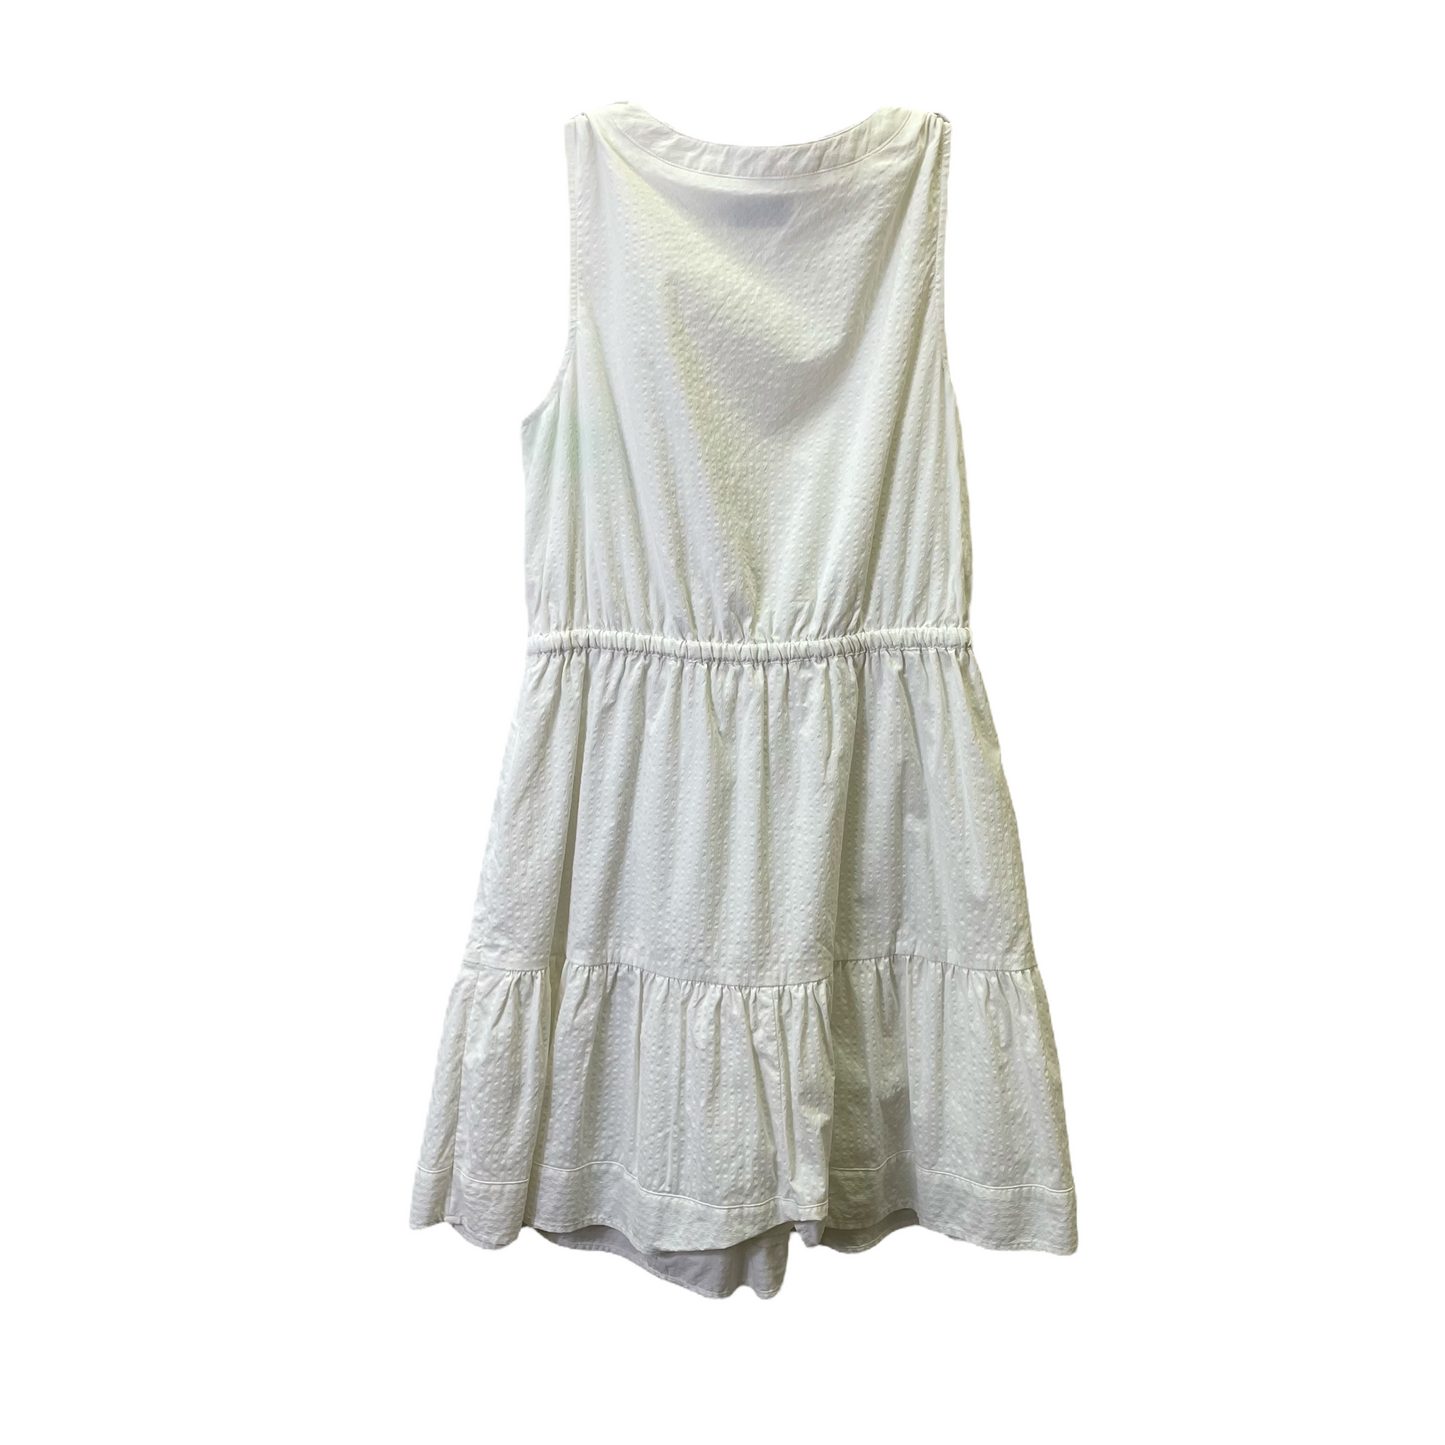 White Dress Casual Short By Vineyard Vines, Size: Xs